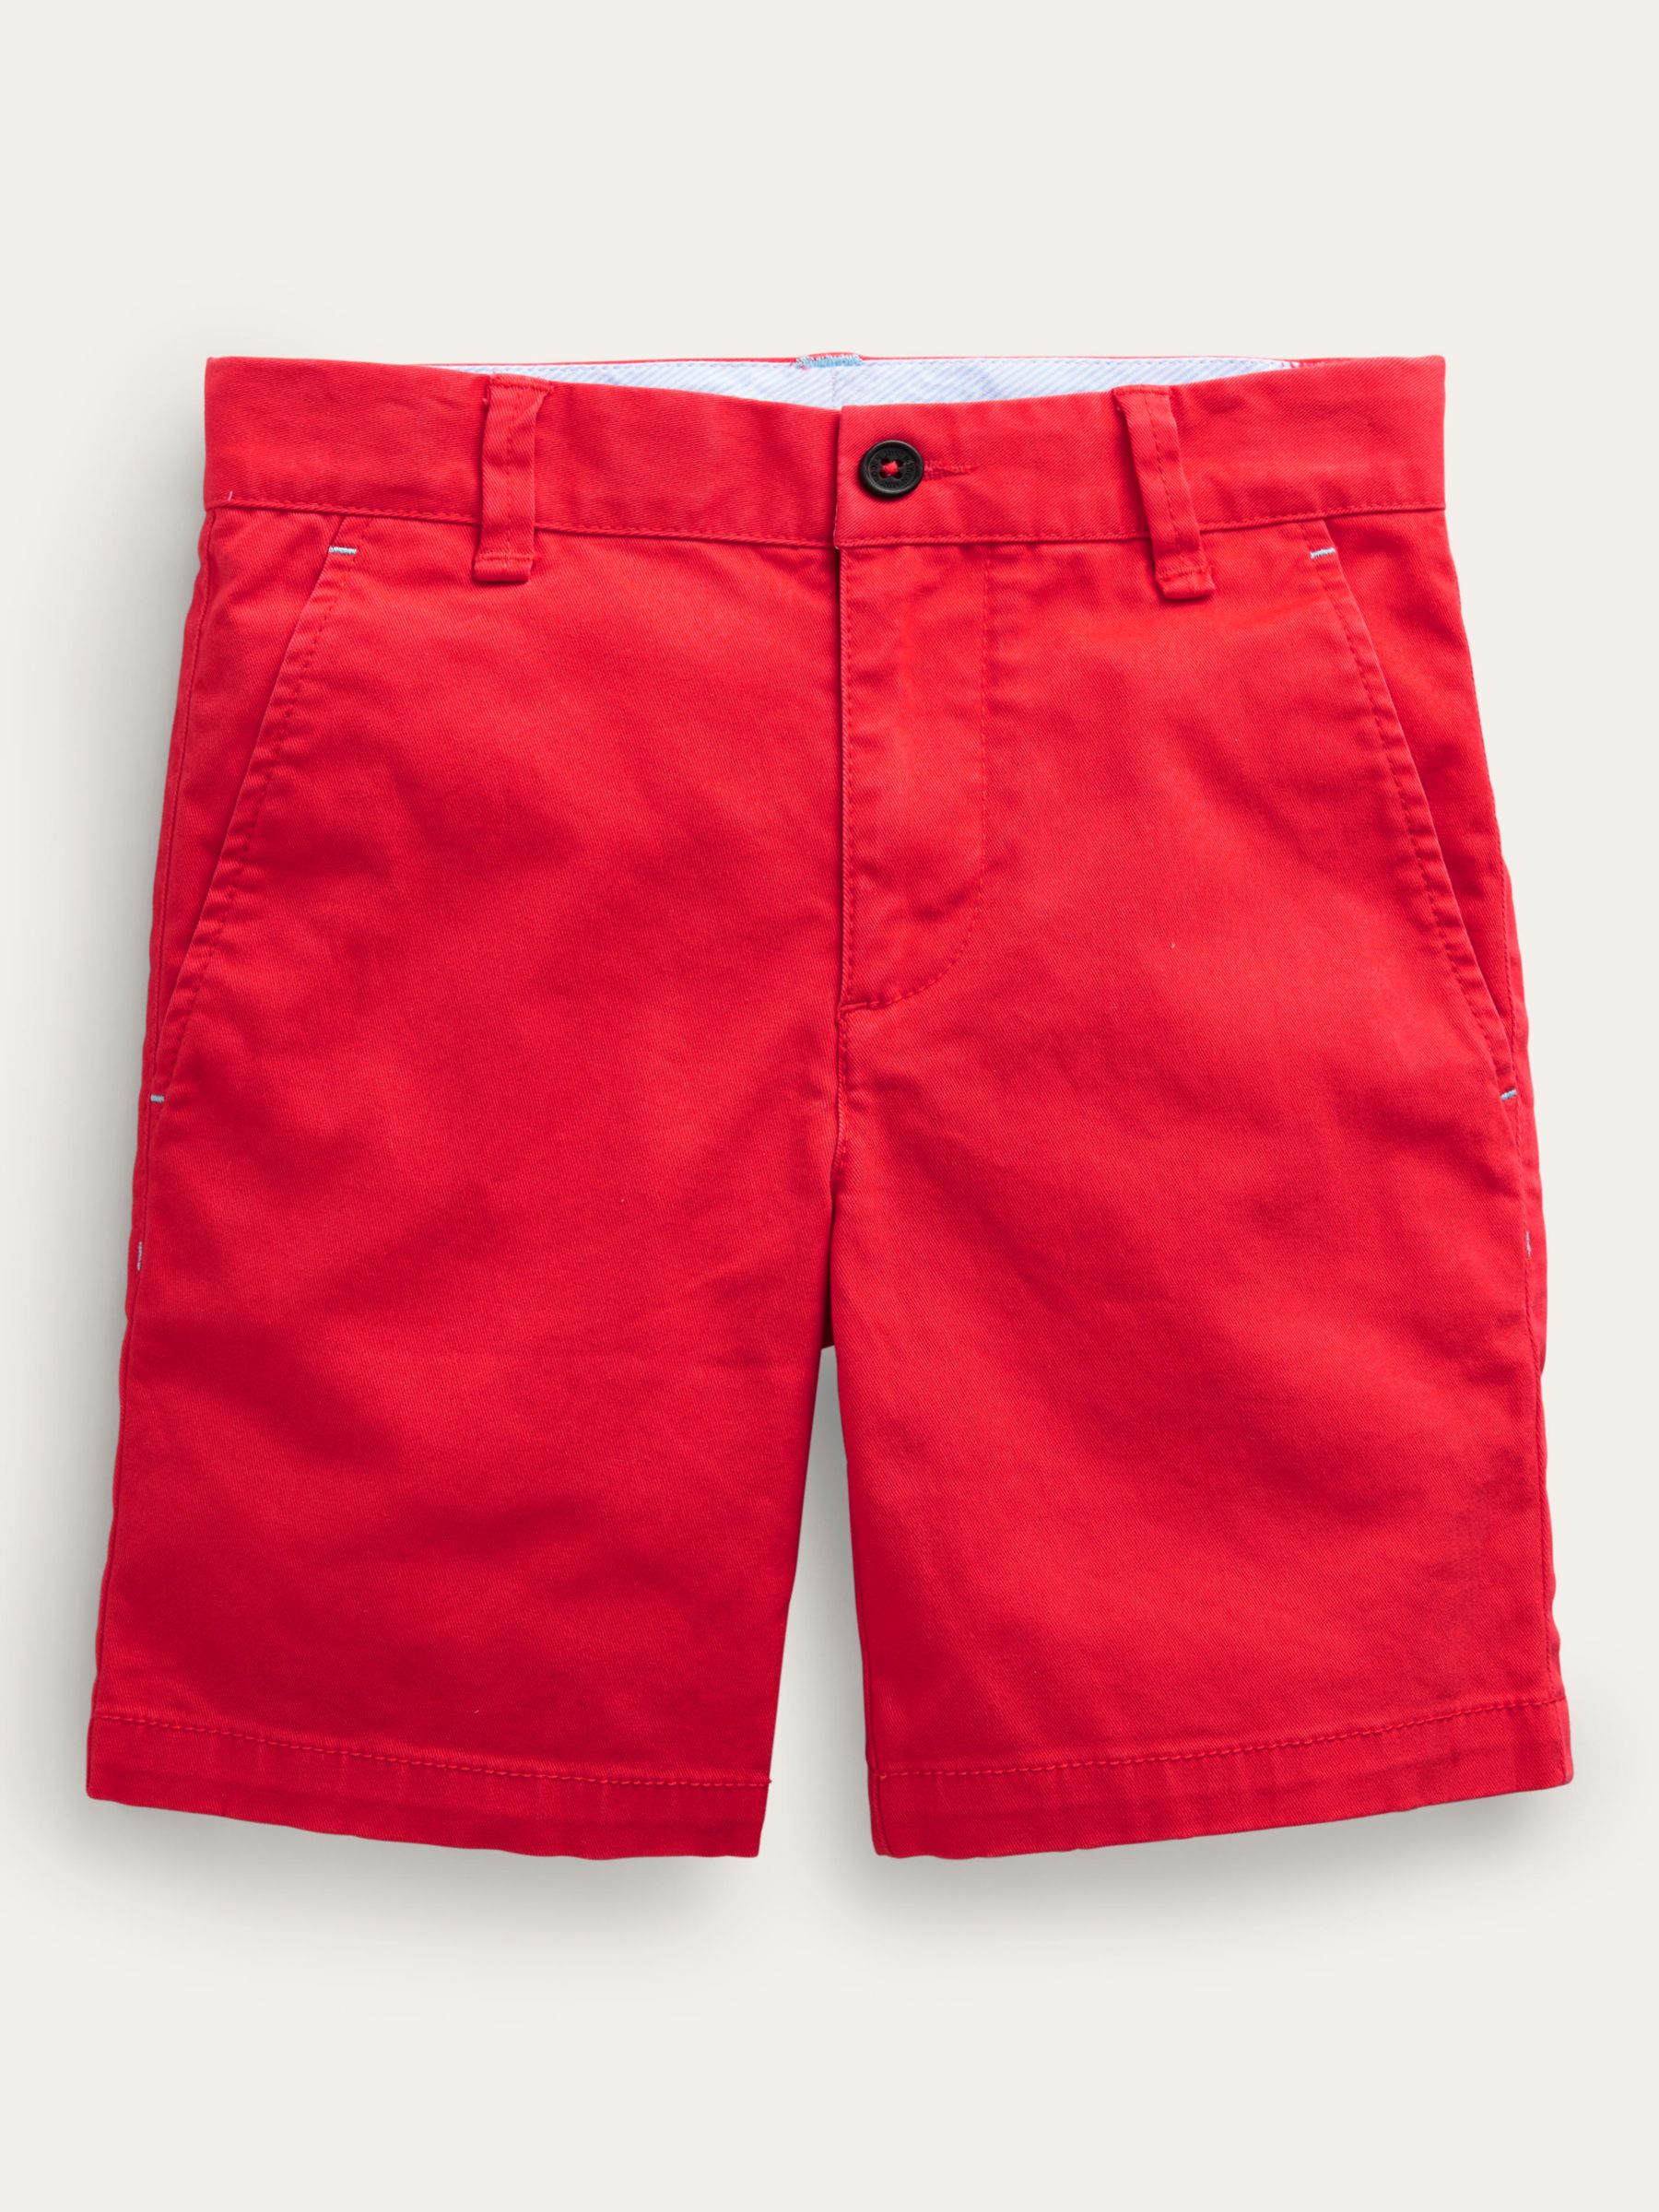 Buy Mini Boden Kids' Classic Chino Shorts Online at johnlewis.com